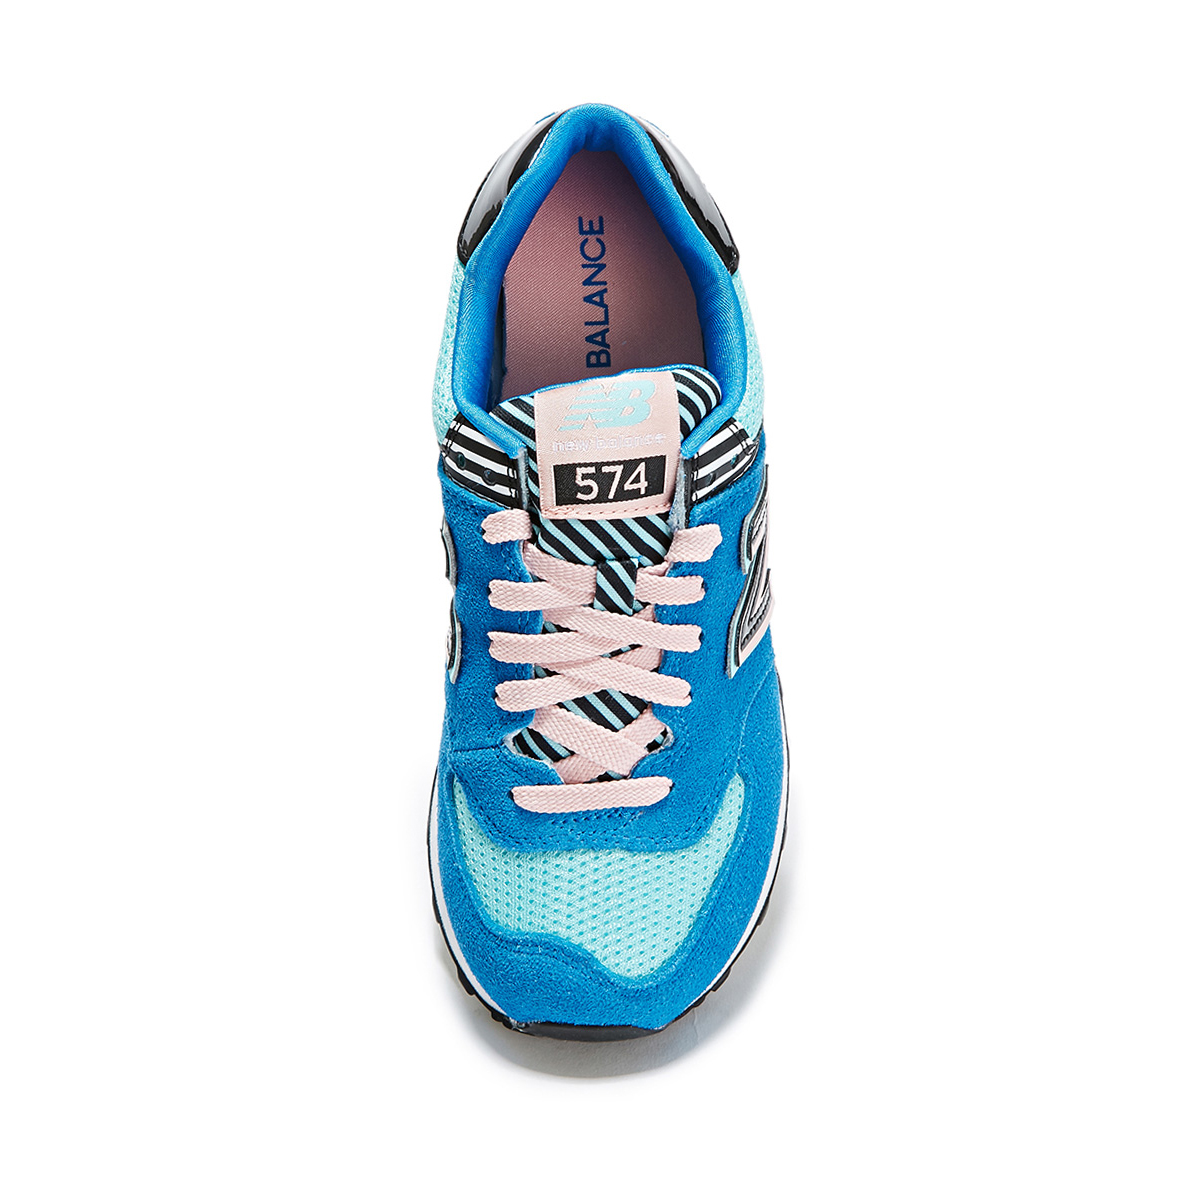 Chaussures sports nautiques NEW BALANCE - Ref 1060878 Image 9